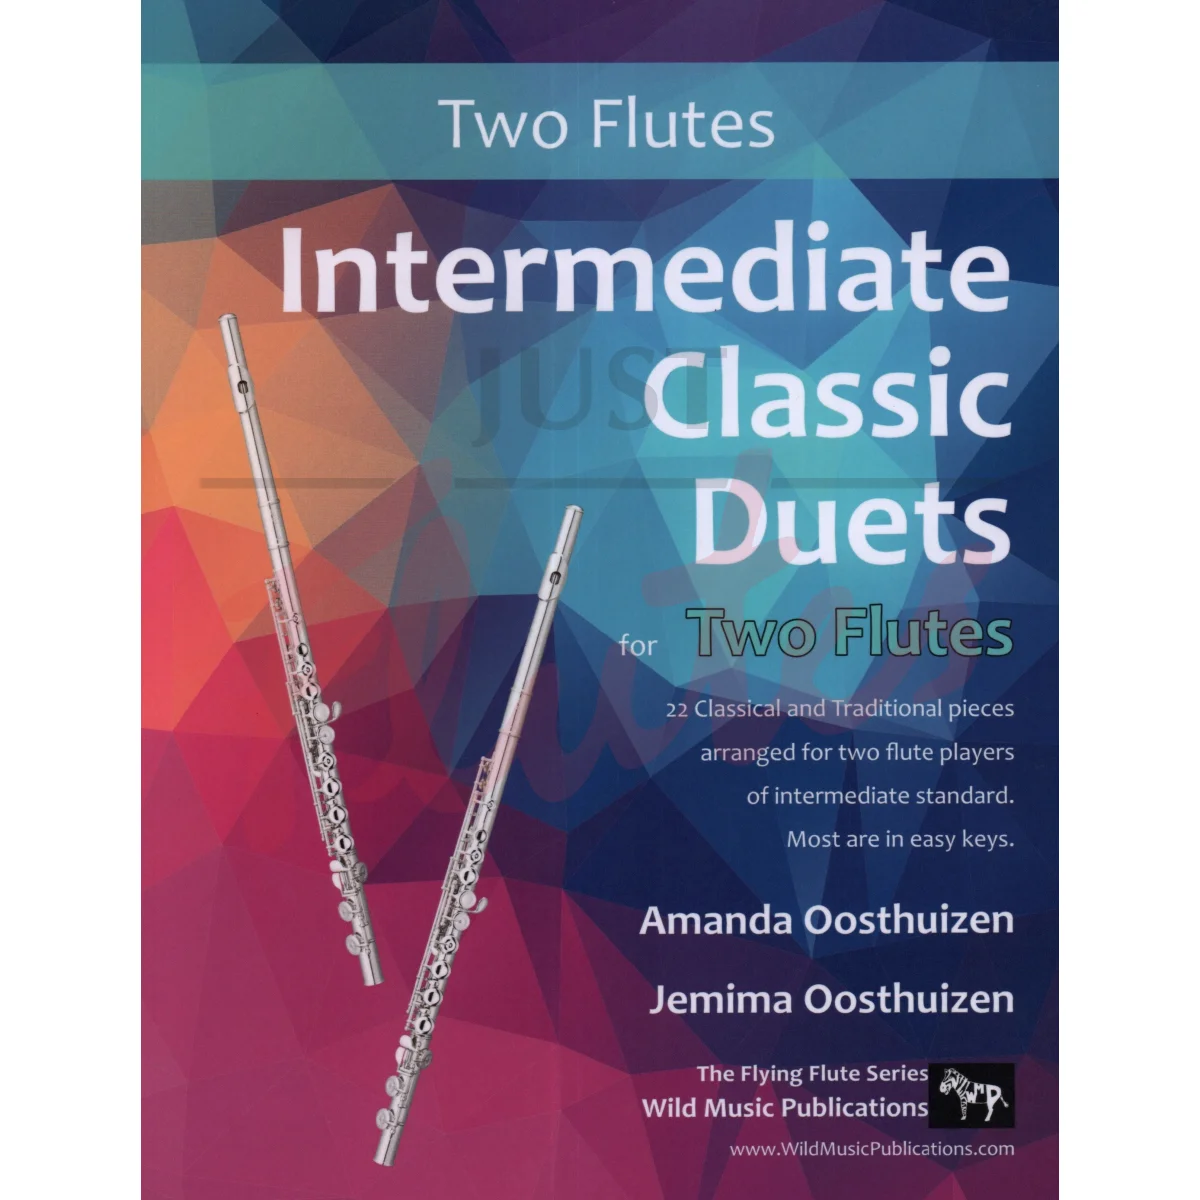 Intermediate Classic Duets for Two Flutes